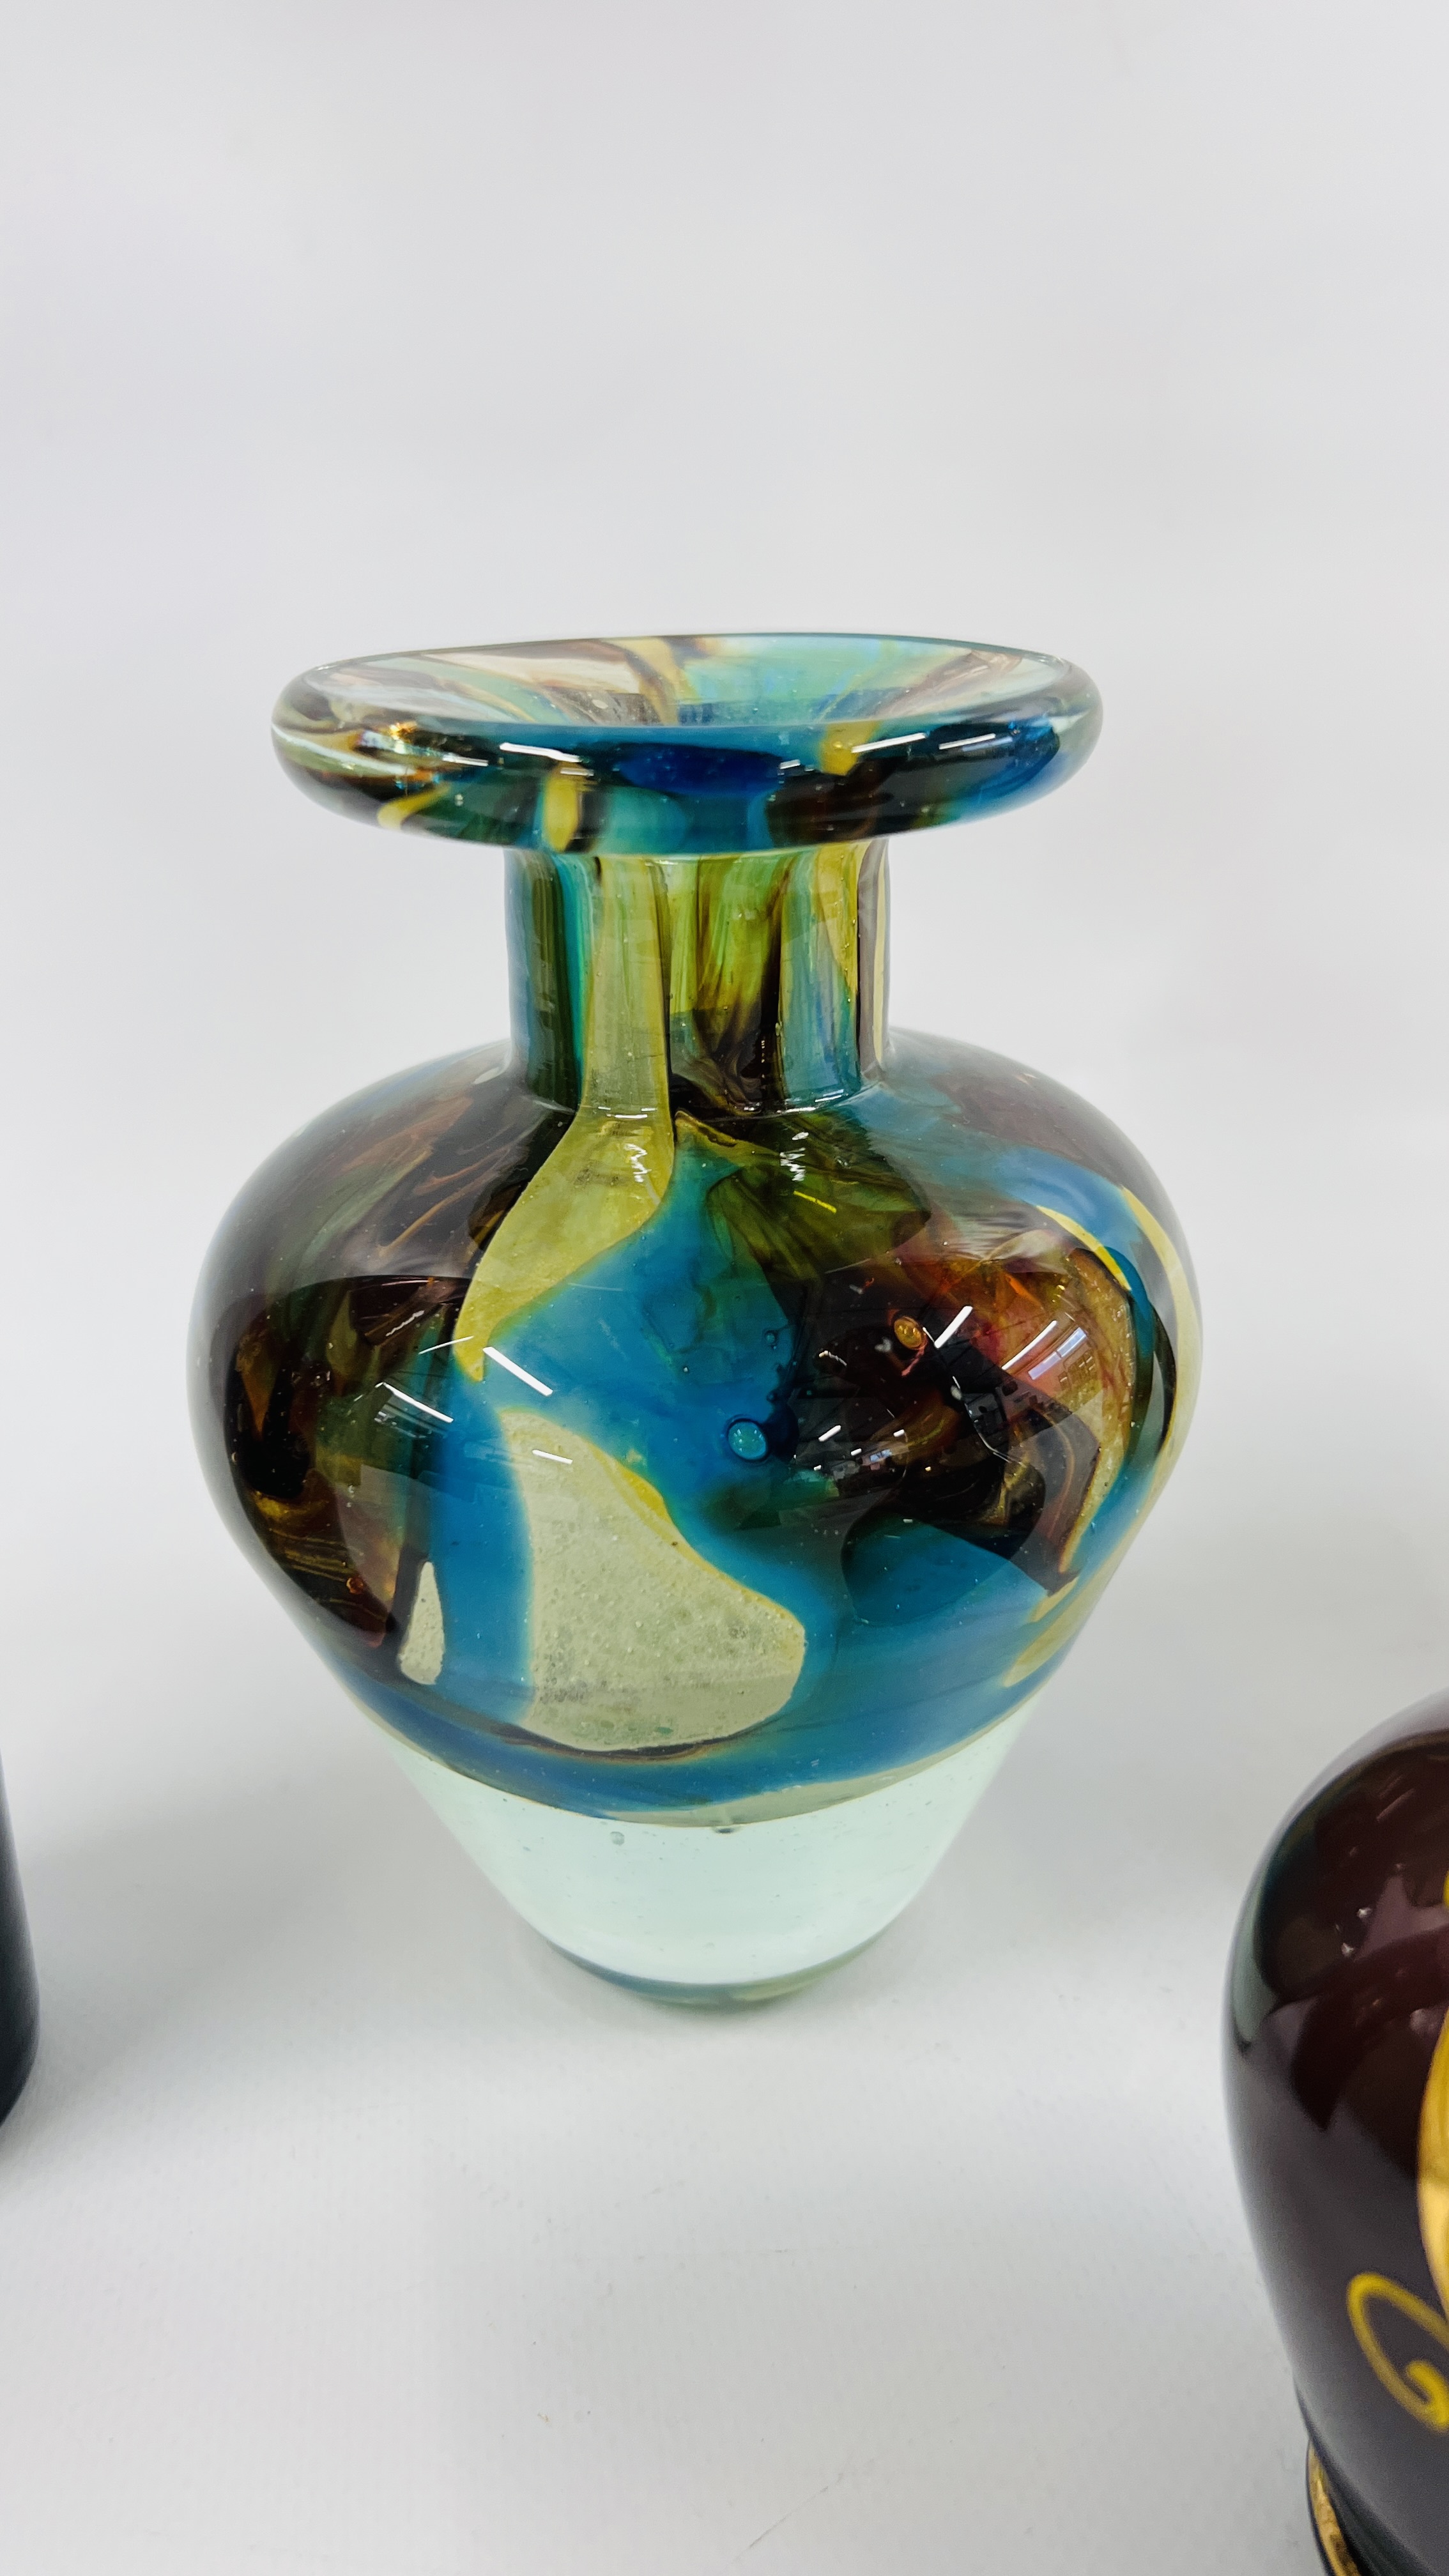 MADINA ART GLASS VASE HEIGHT 14.5CM. ALONG WITH A 1960'S MURANO GLASS FLOWER MIRROR HEIGHT 20CM. - Image 5 of 6